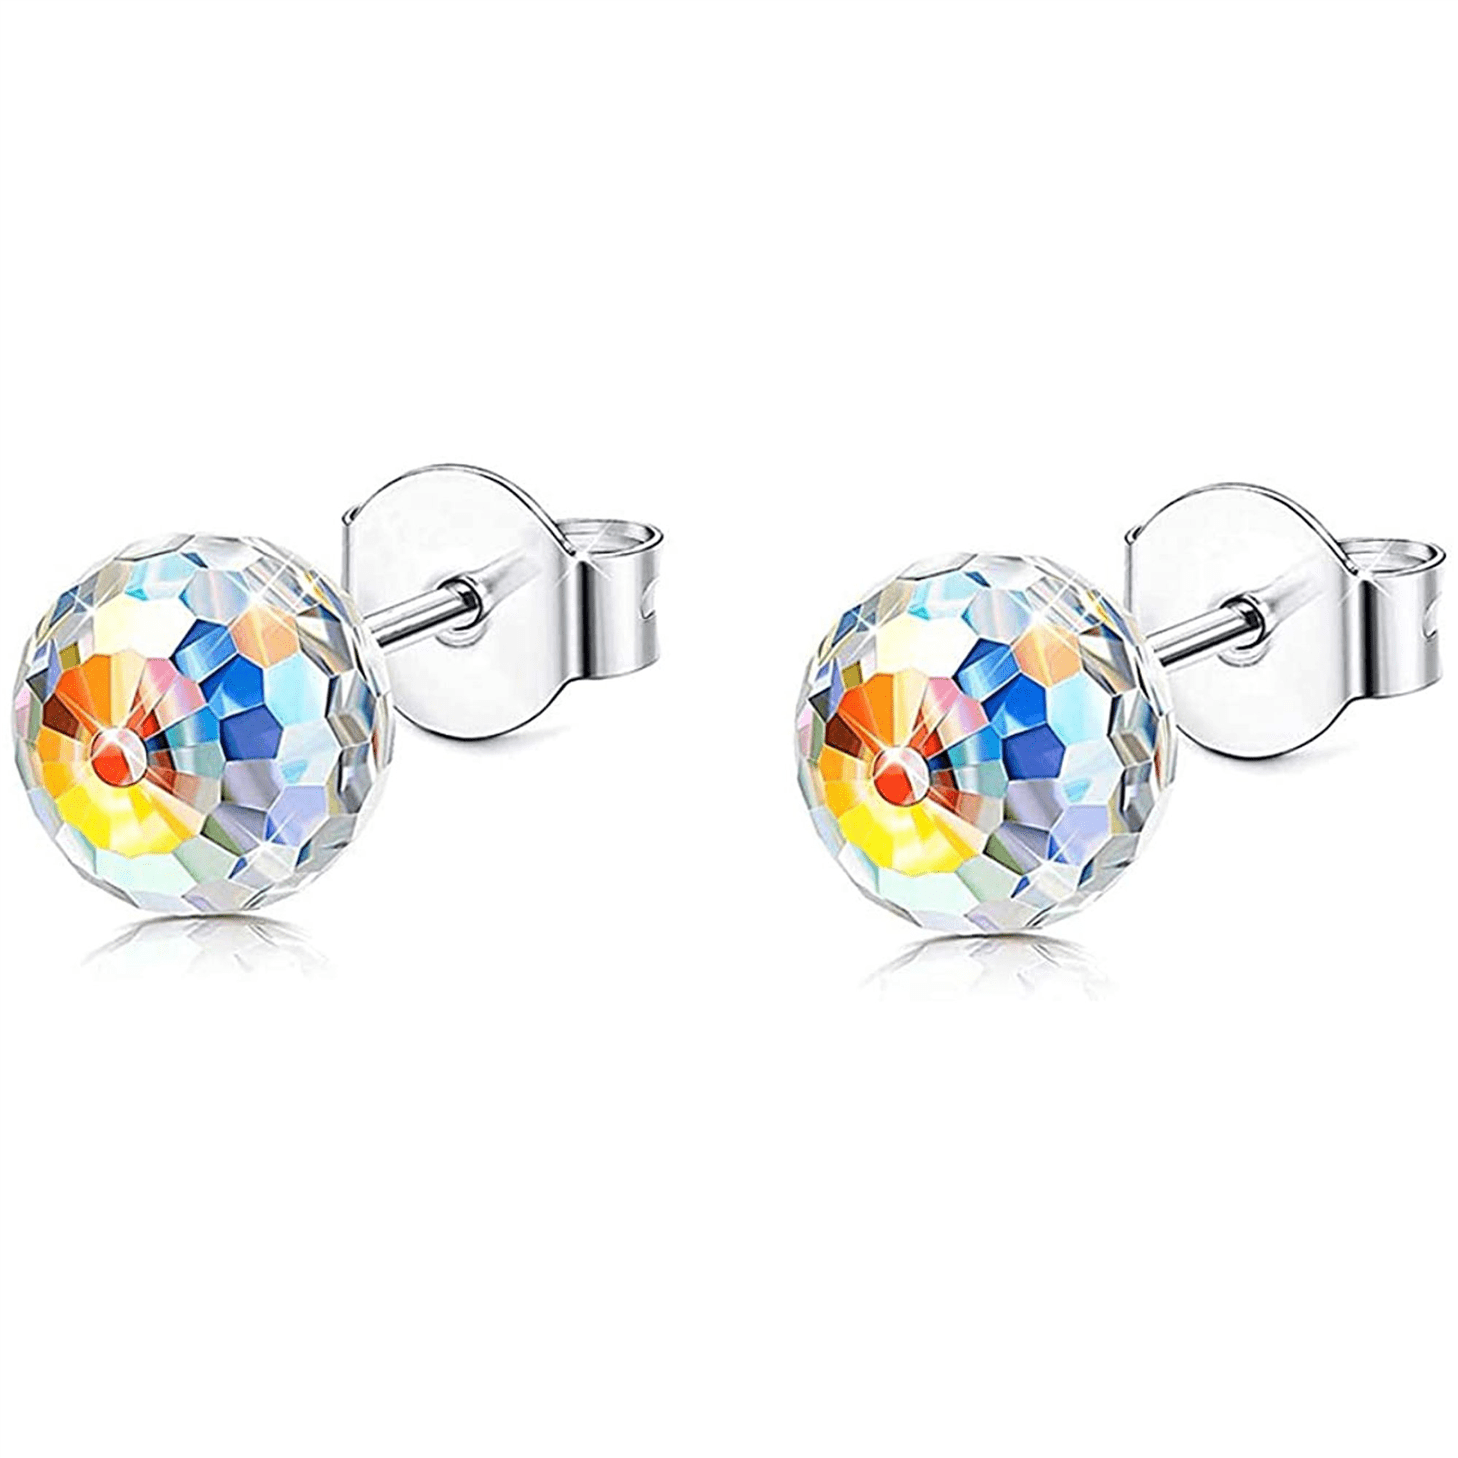 .925 Sterling Silver Aurora Borealis Aqua Crystal Round Stud Earrings for Girls Hypoallergenic